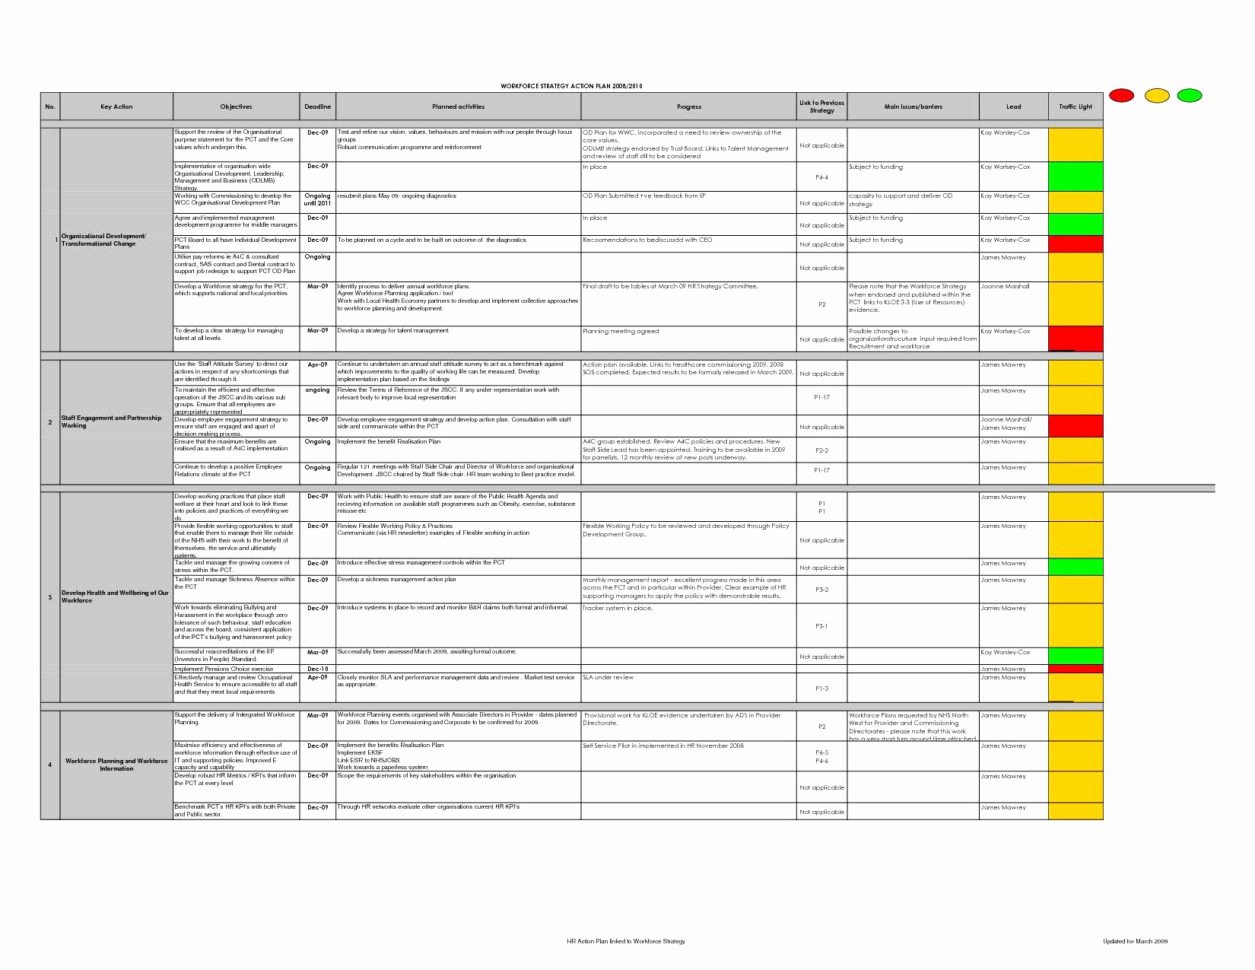 Employee Performance Review Template Excel Luxury Performance Review Spreadsheet Spreadsheet Downloa